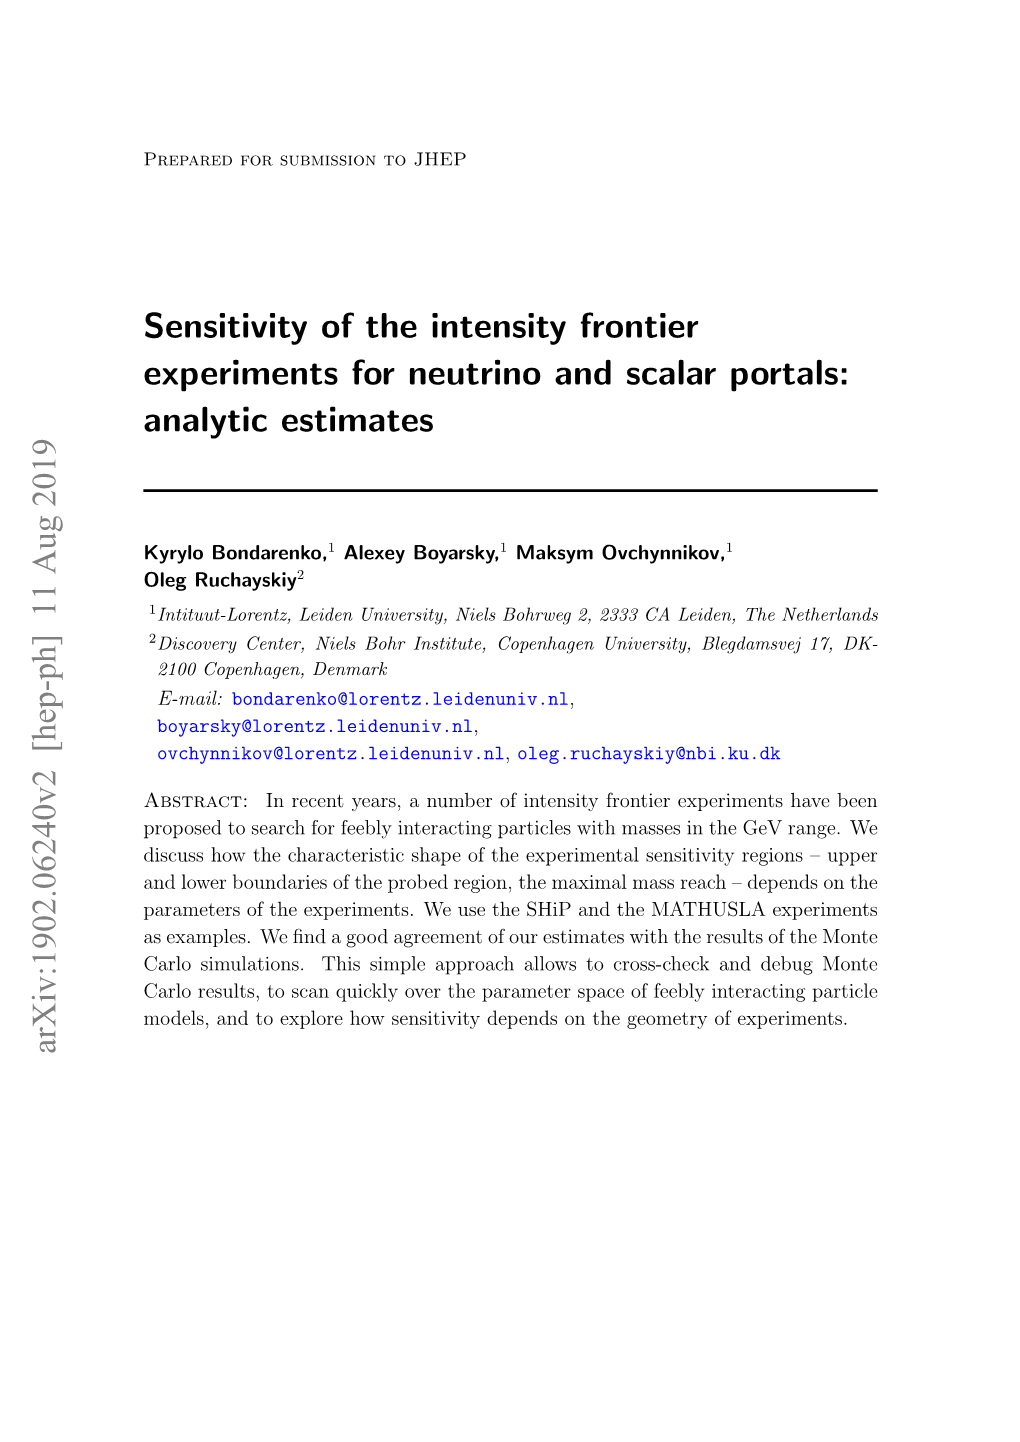 Sensitivity of the Intensity Frontier Experiments for Neutrino and Scalar Portals: Analytic Estimates